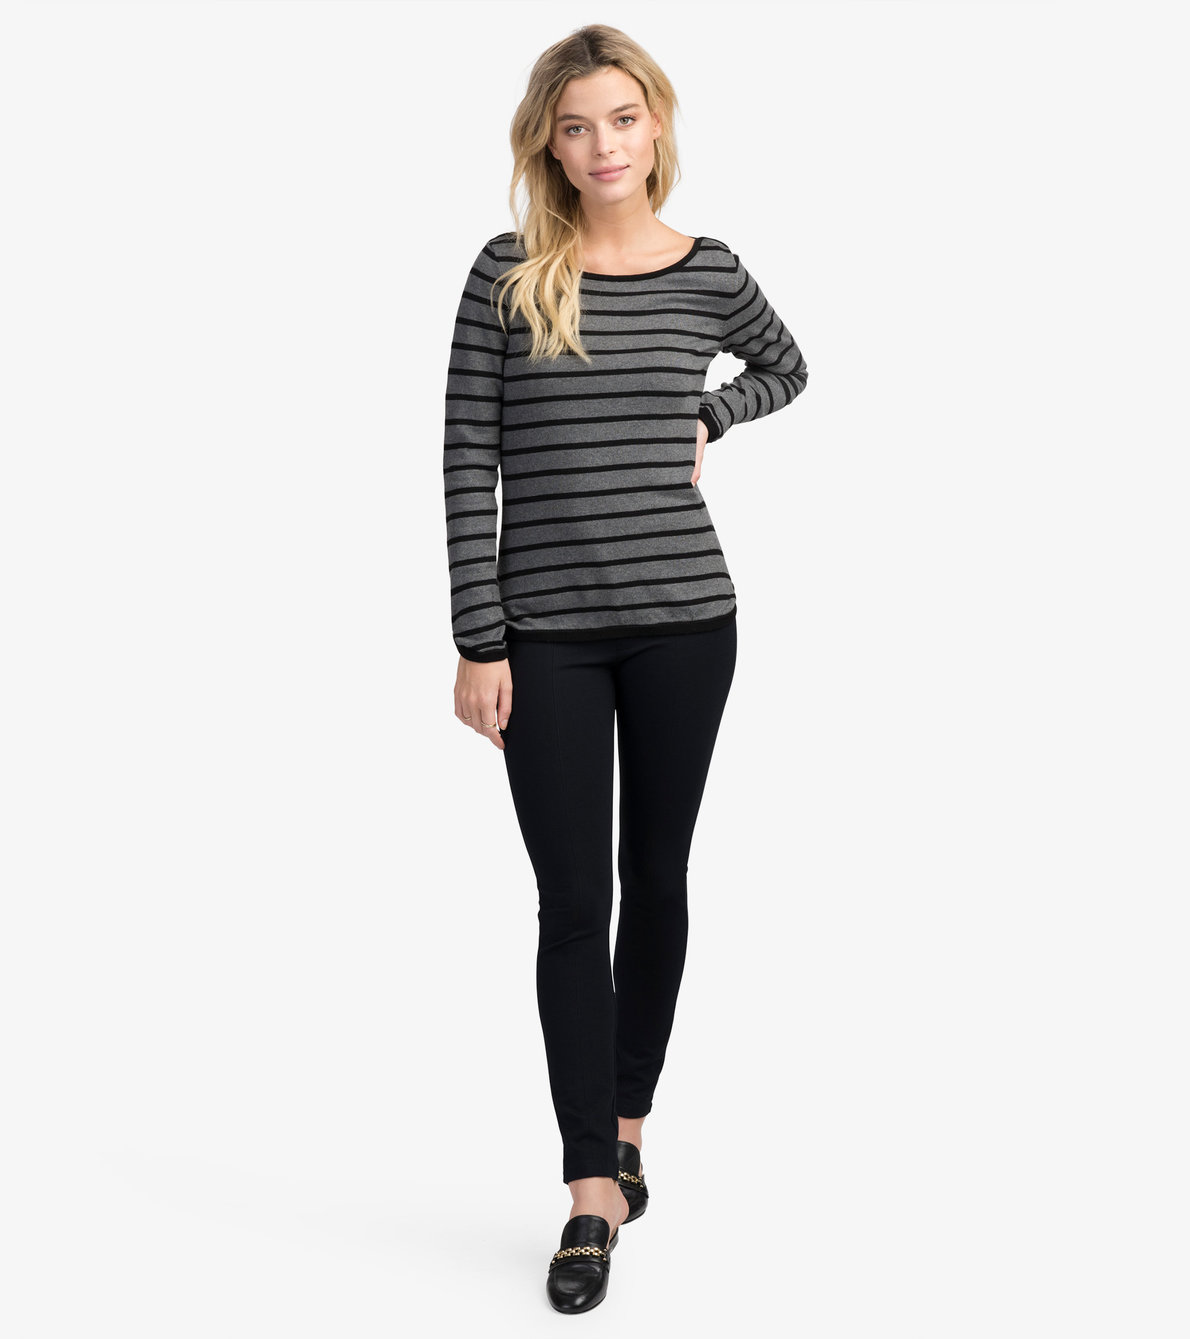 View larger image of Charcoal and Black Stripes Breton Top